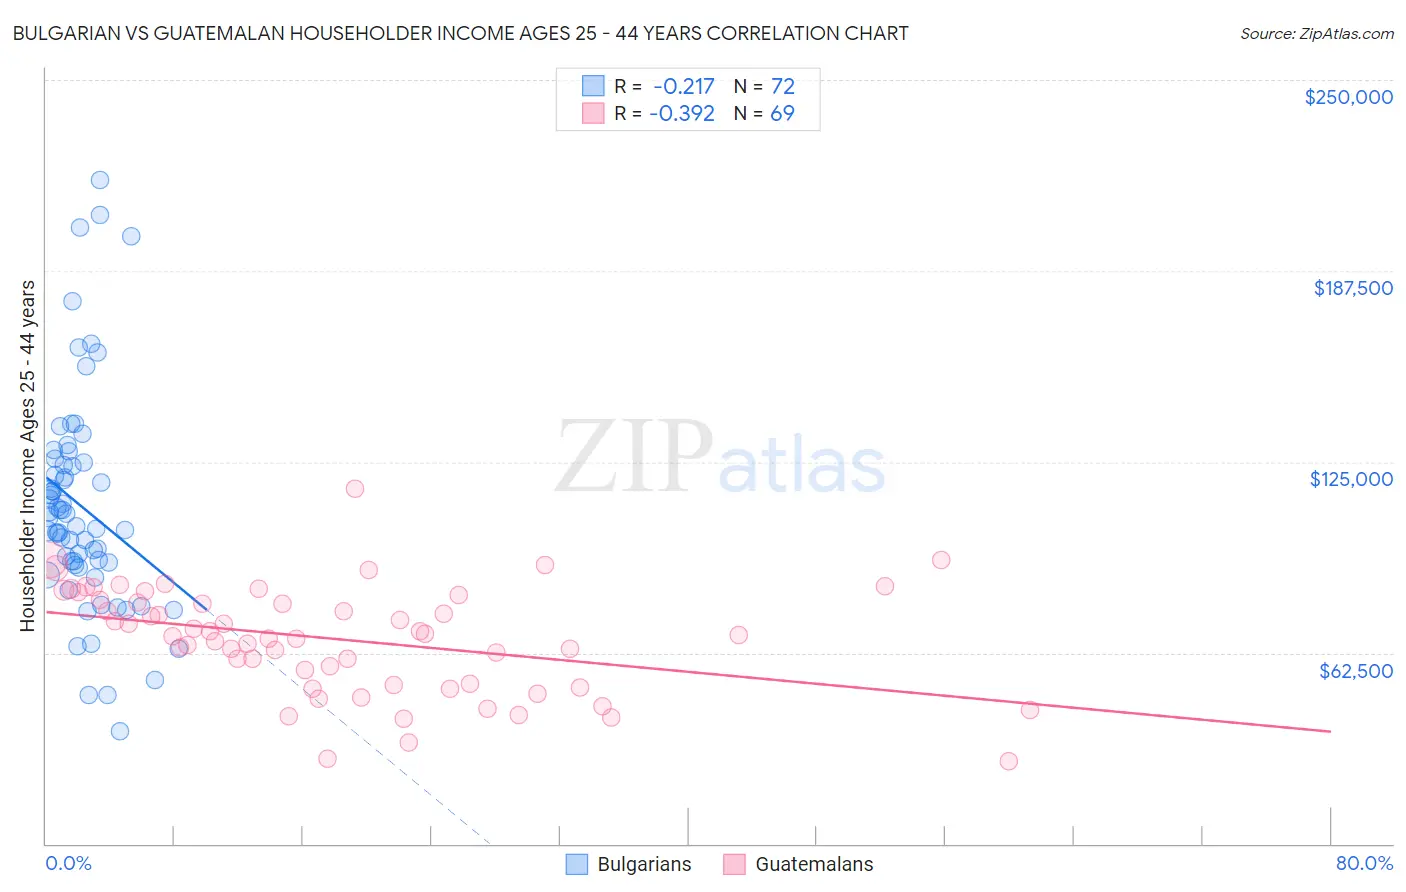 Bulgarian vs Guatemalan Householder Income Ages 25 - 44 years